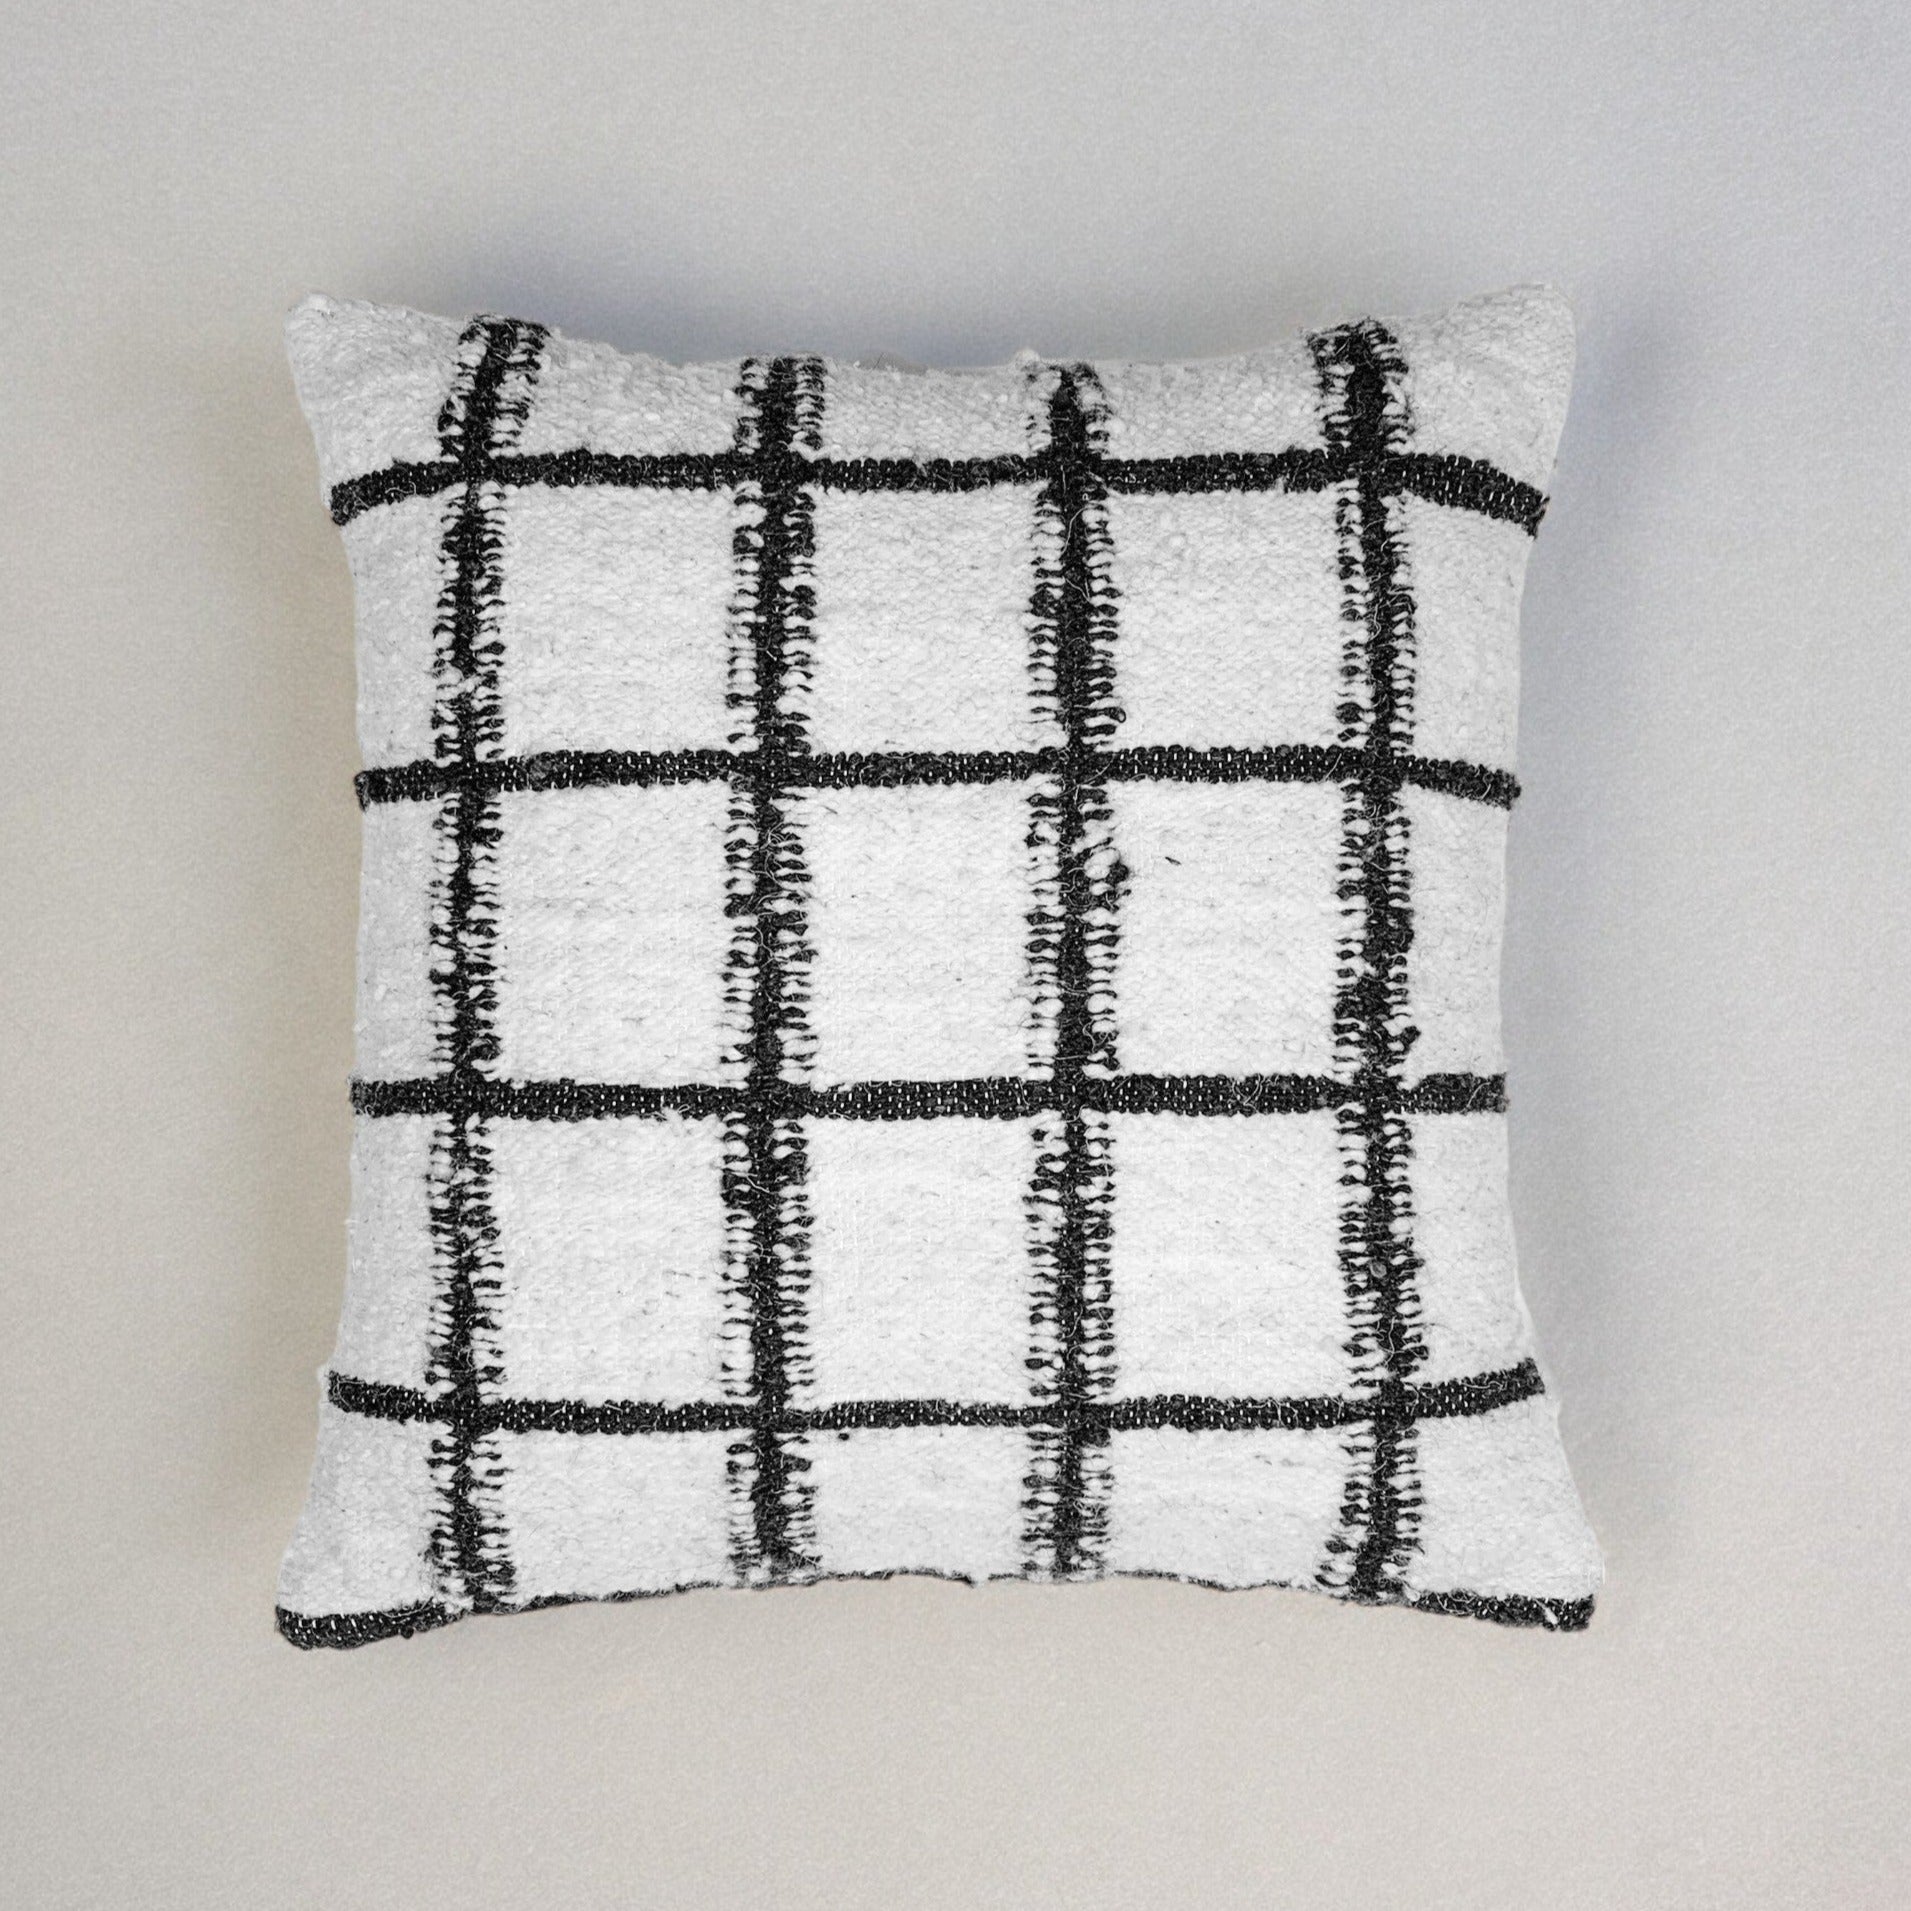 Grid Wool Pillow Cover by Diego Olivero Studio